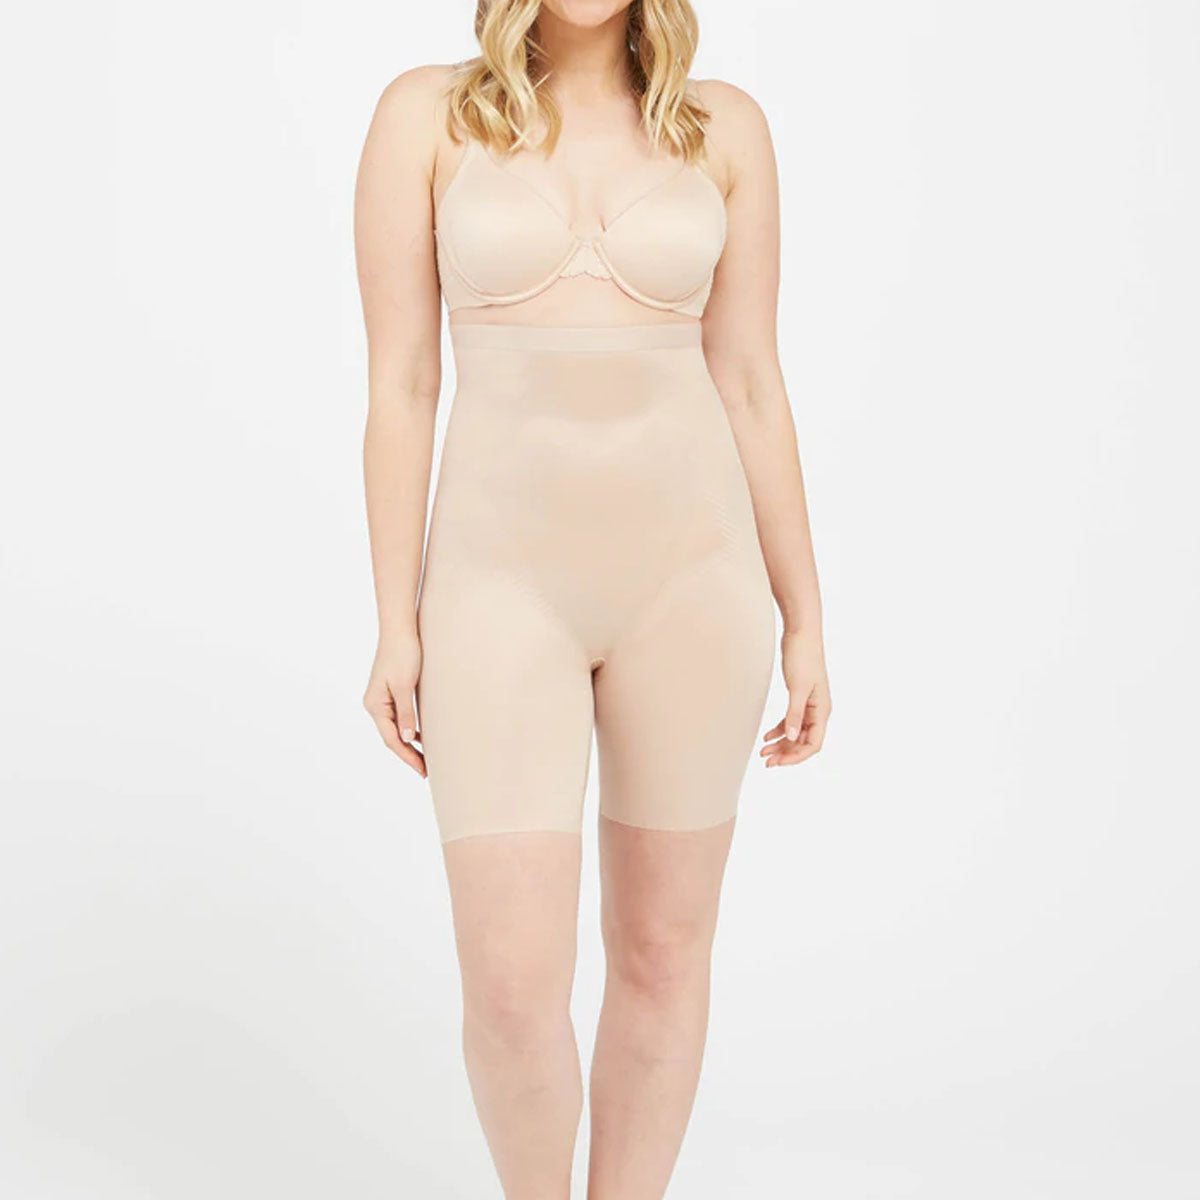 Spanx Thinstincts 2.0 High Waisted Mid-Thigh Short